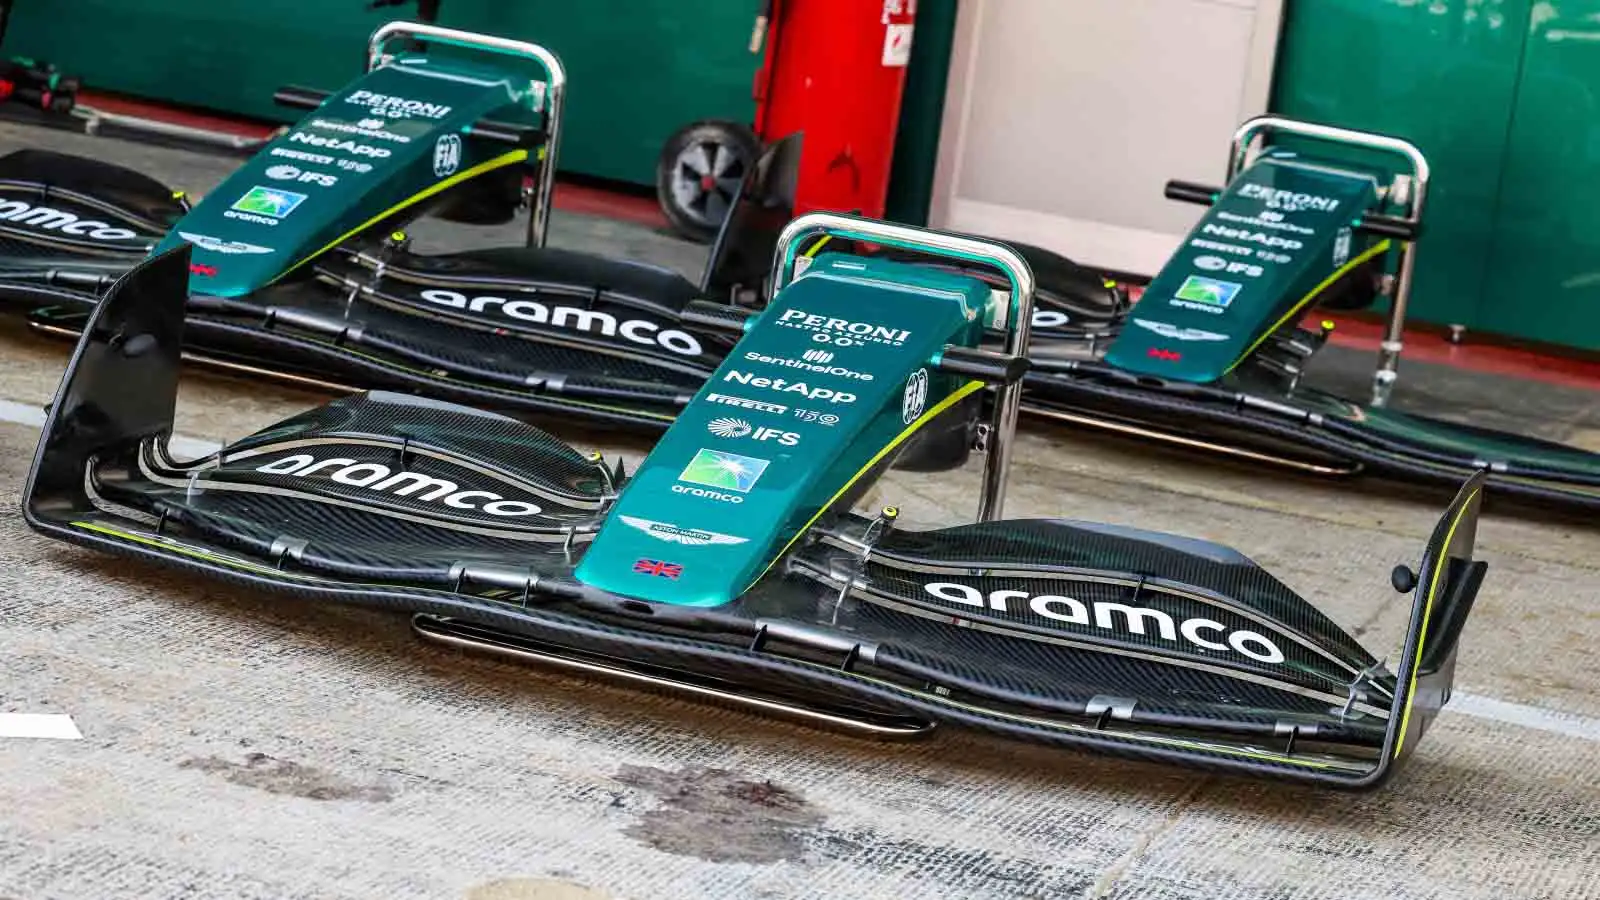 Aston Martin front wings stacked. Barcelona May 2022.